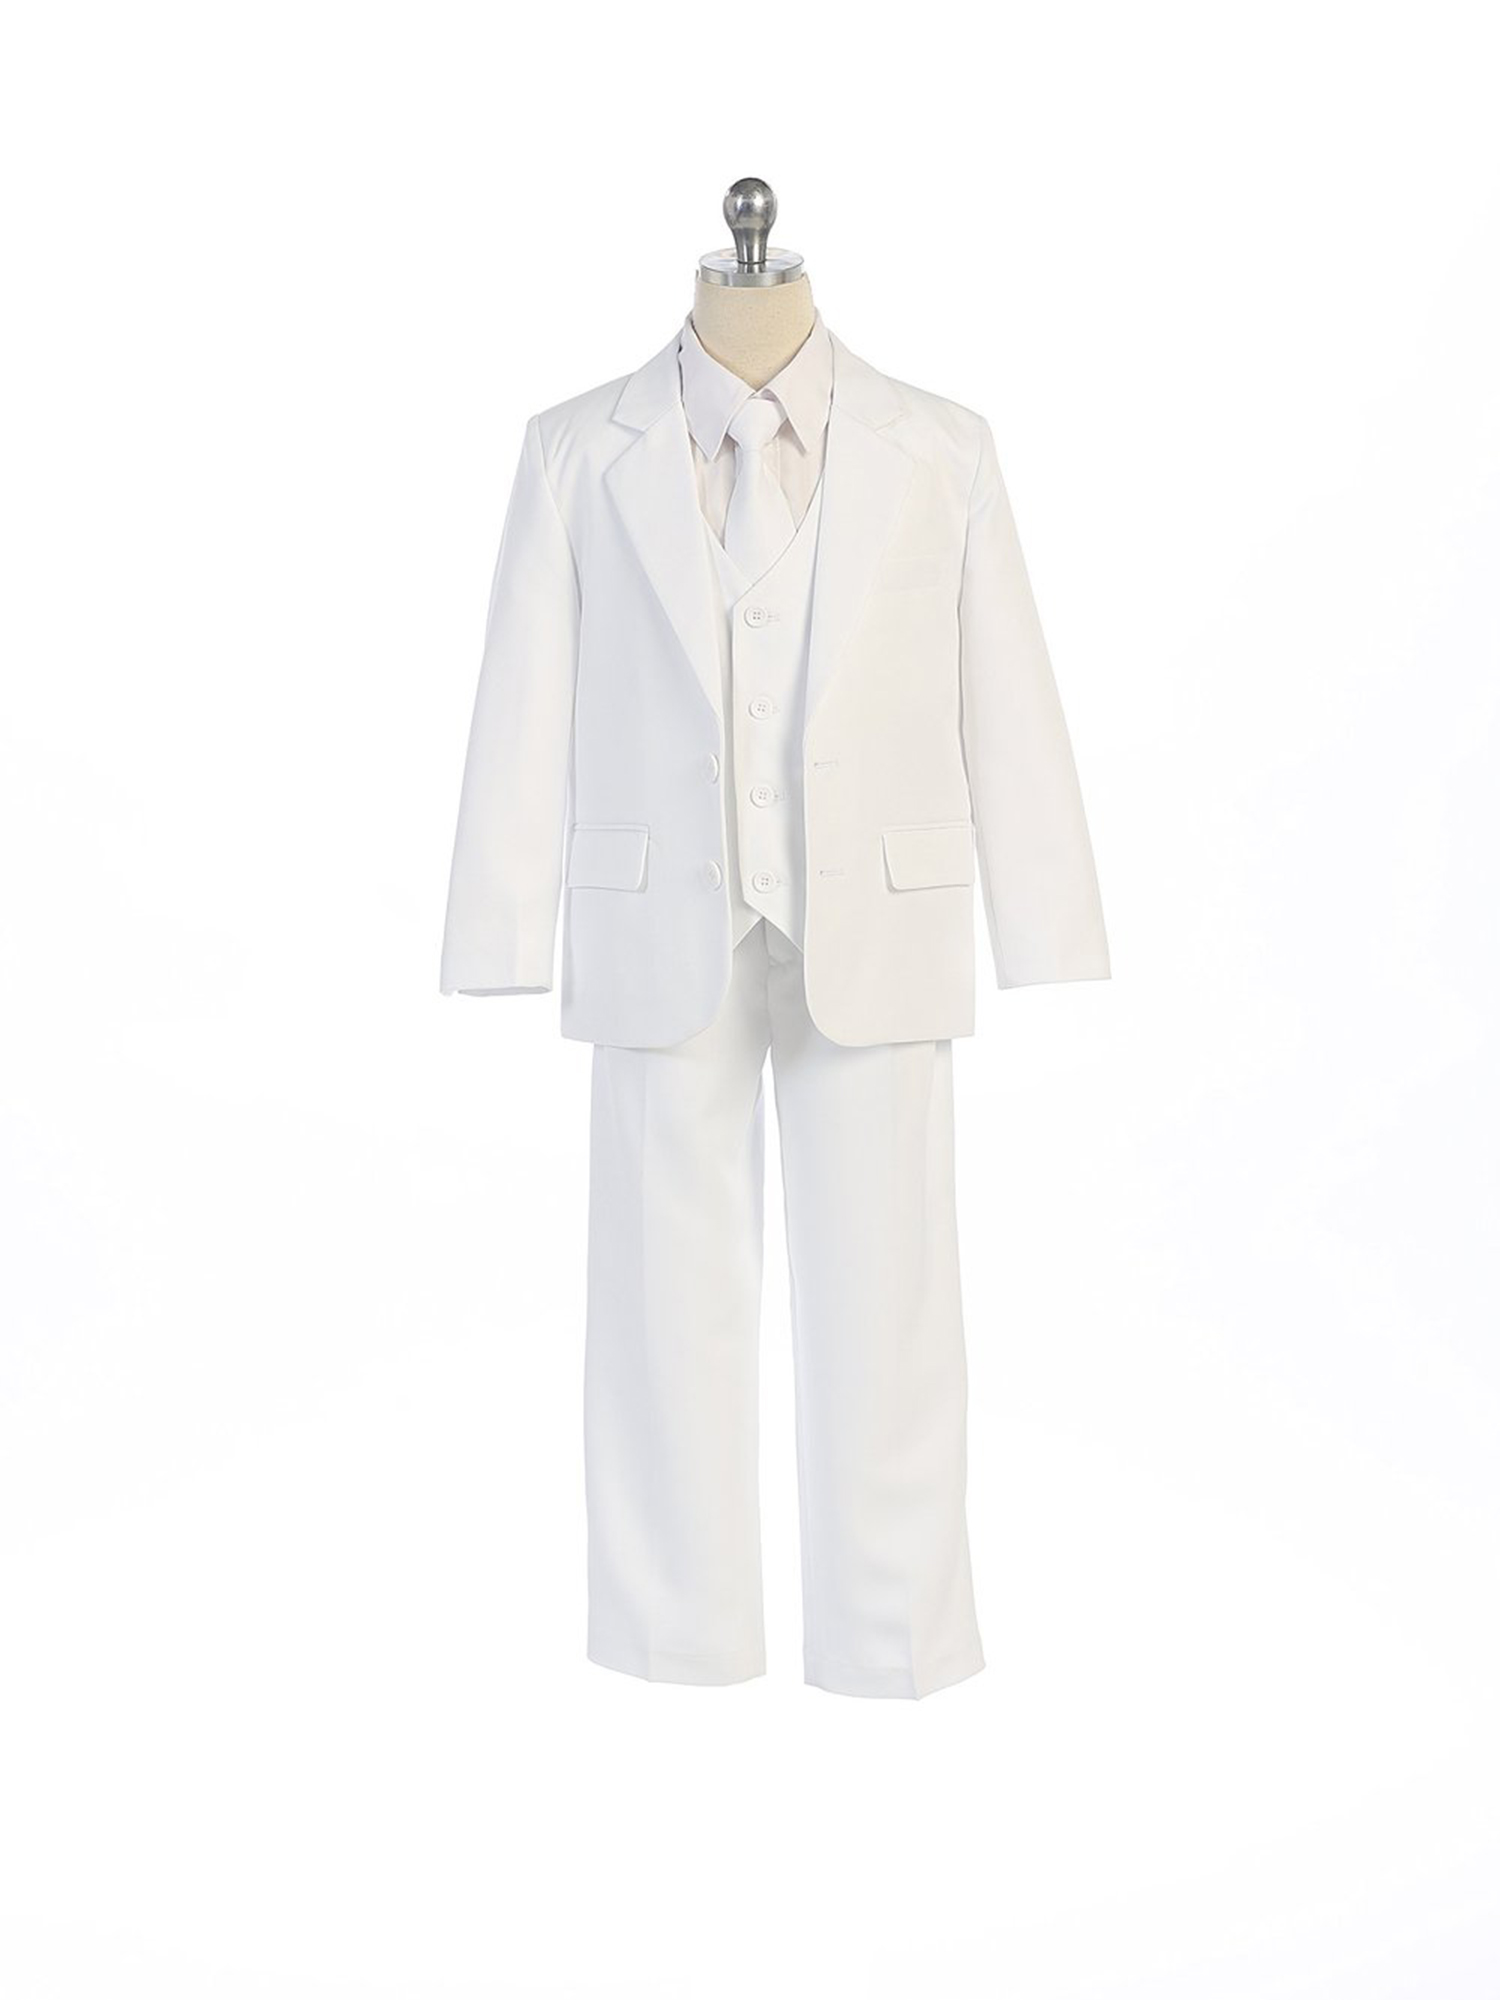 COLE Boys Suit with Shirt and Vest (5-Piece) - (18 Husky, White)